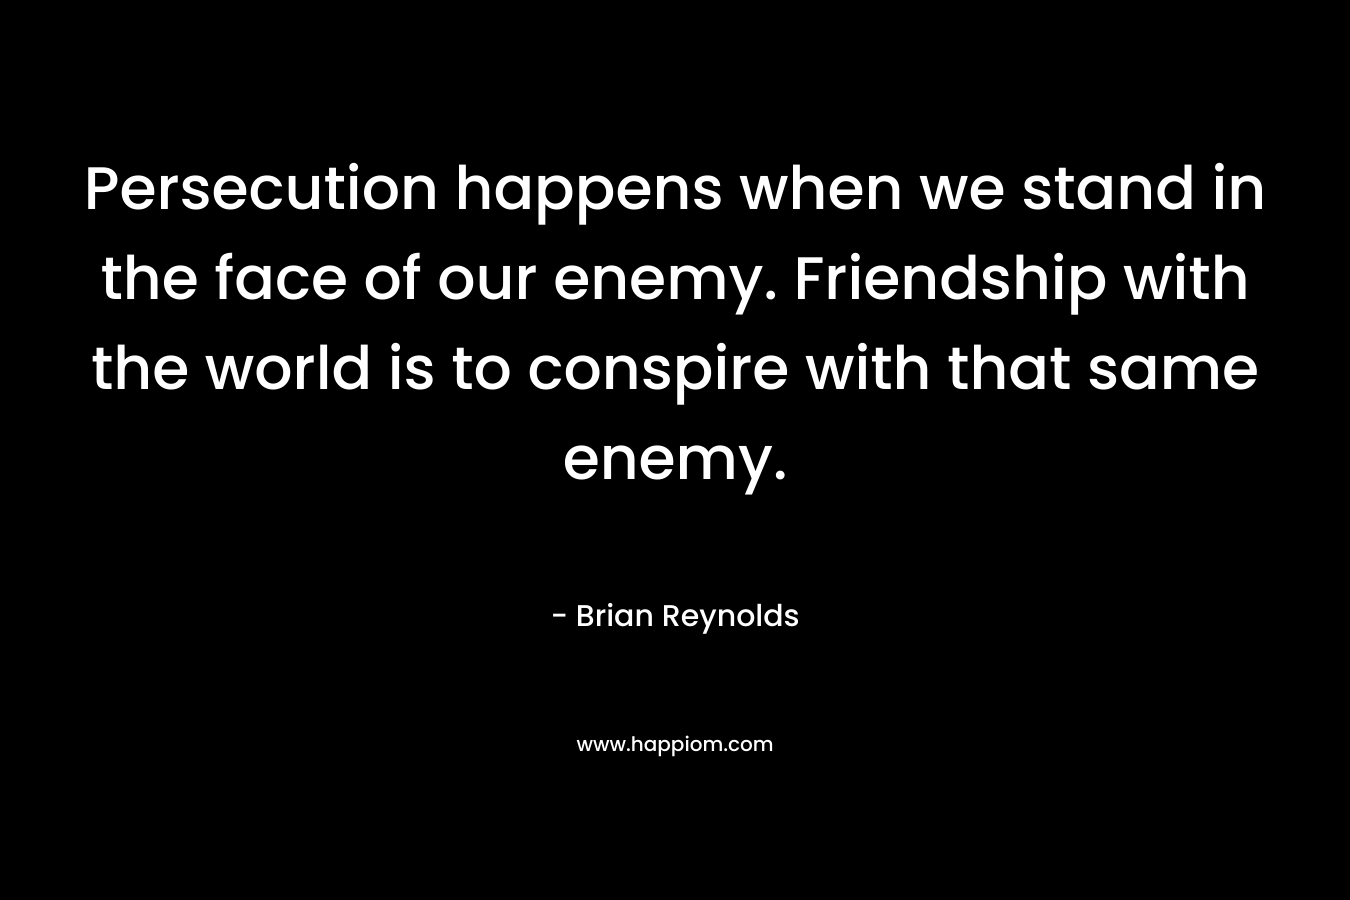 Persecution happens when we stand in the face of our enemy. Friendship with the world is to conspire with that same enemy.